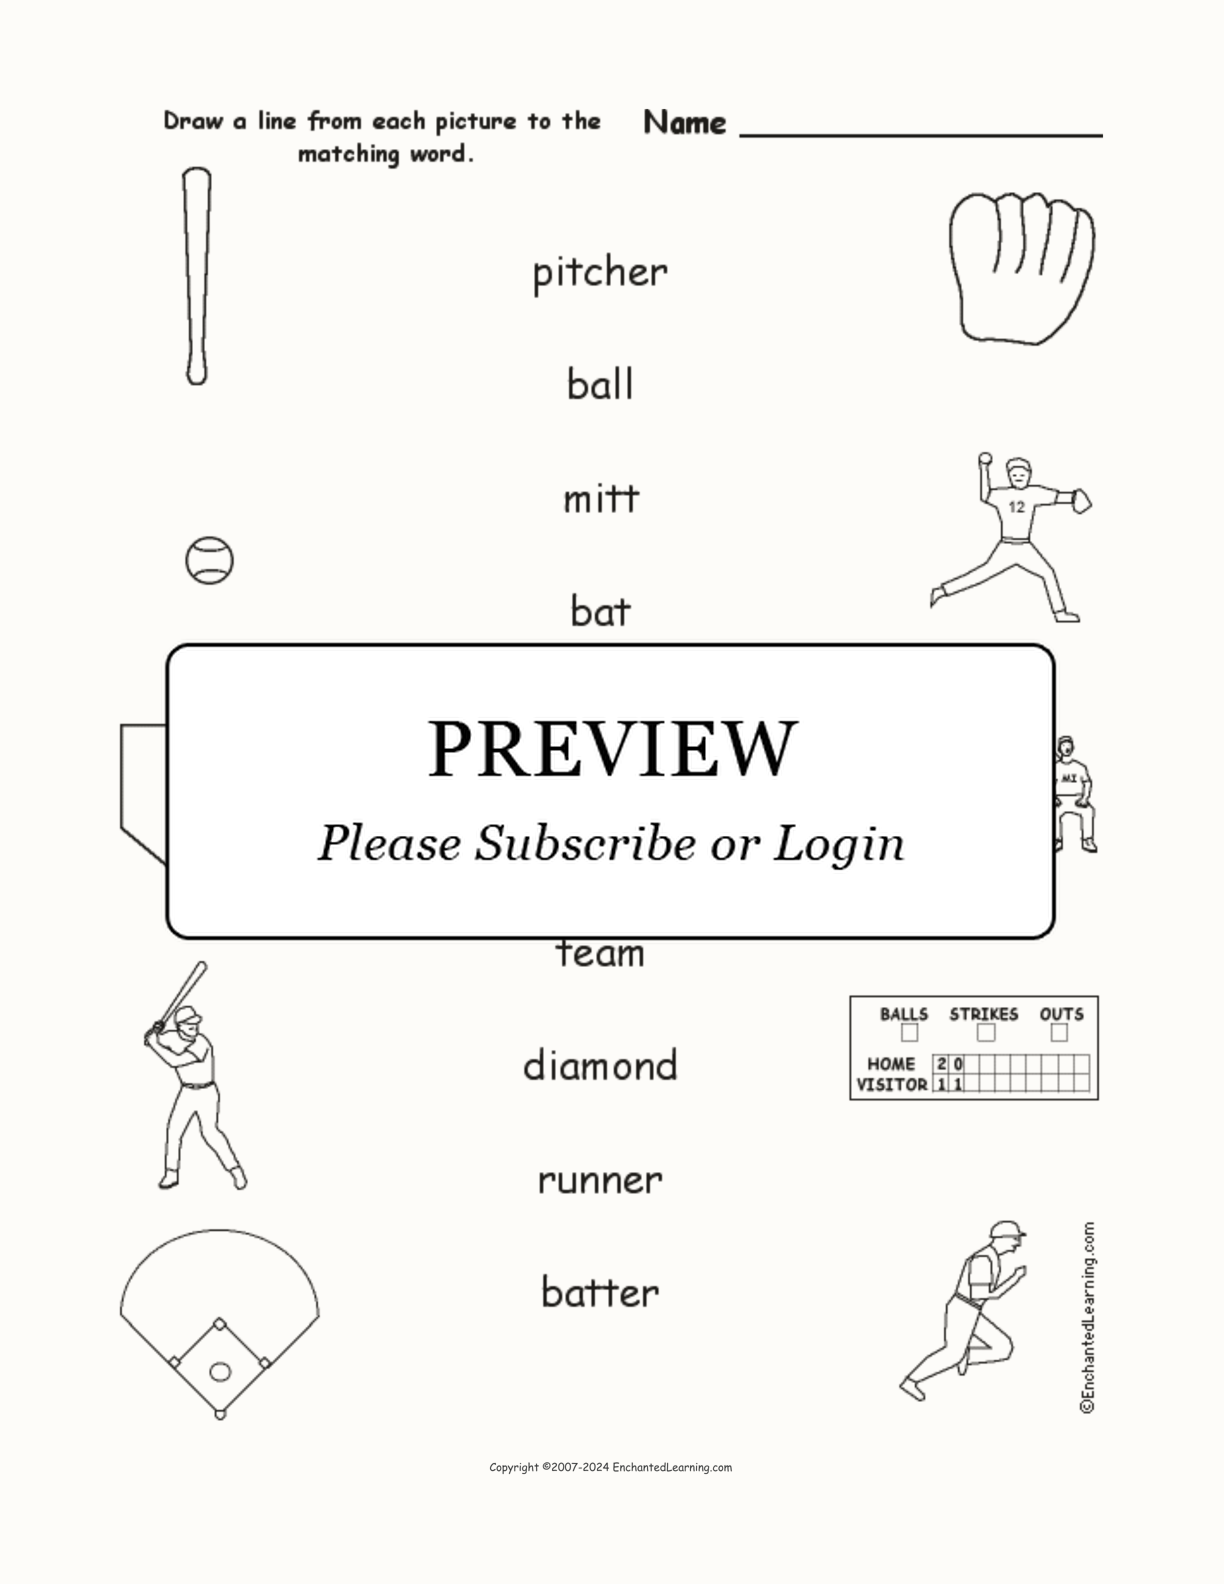 Baseball - Match the Words to the Pictures interactive worksheet page 1